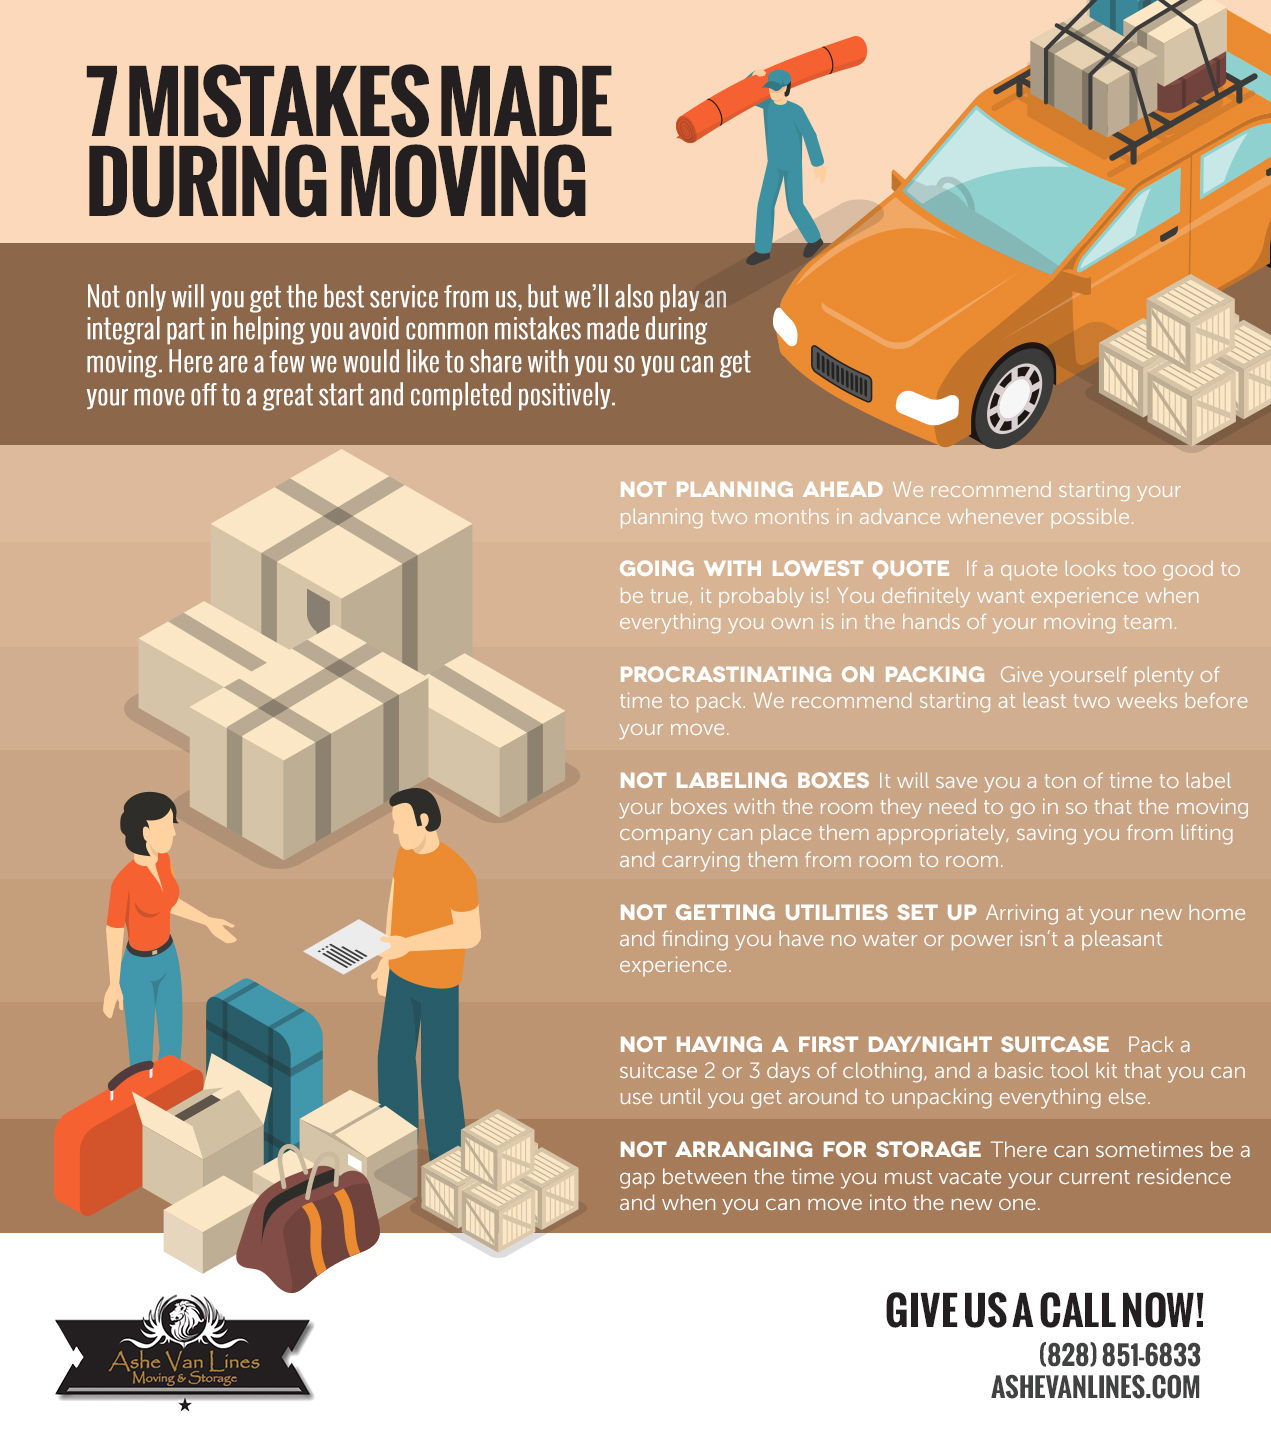 7 mistakes made during moving.